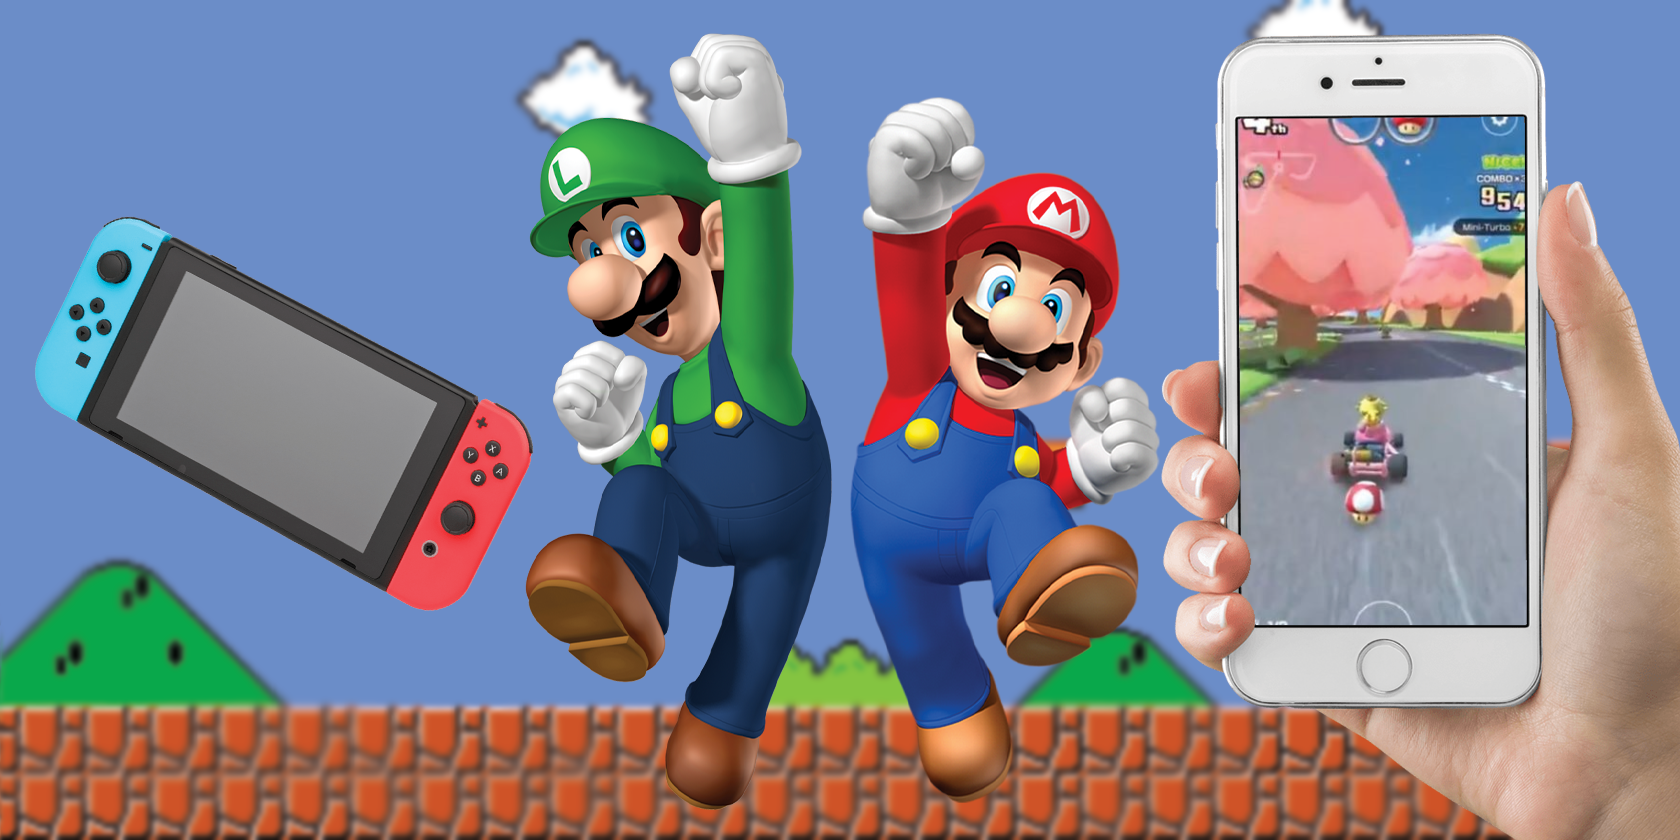 switch console with mario luigi and a smartphone displaying a screenshot of mariokart